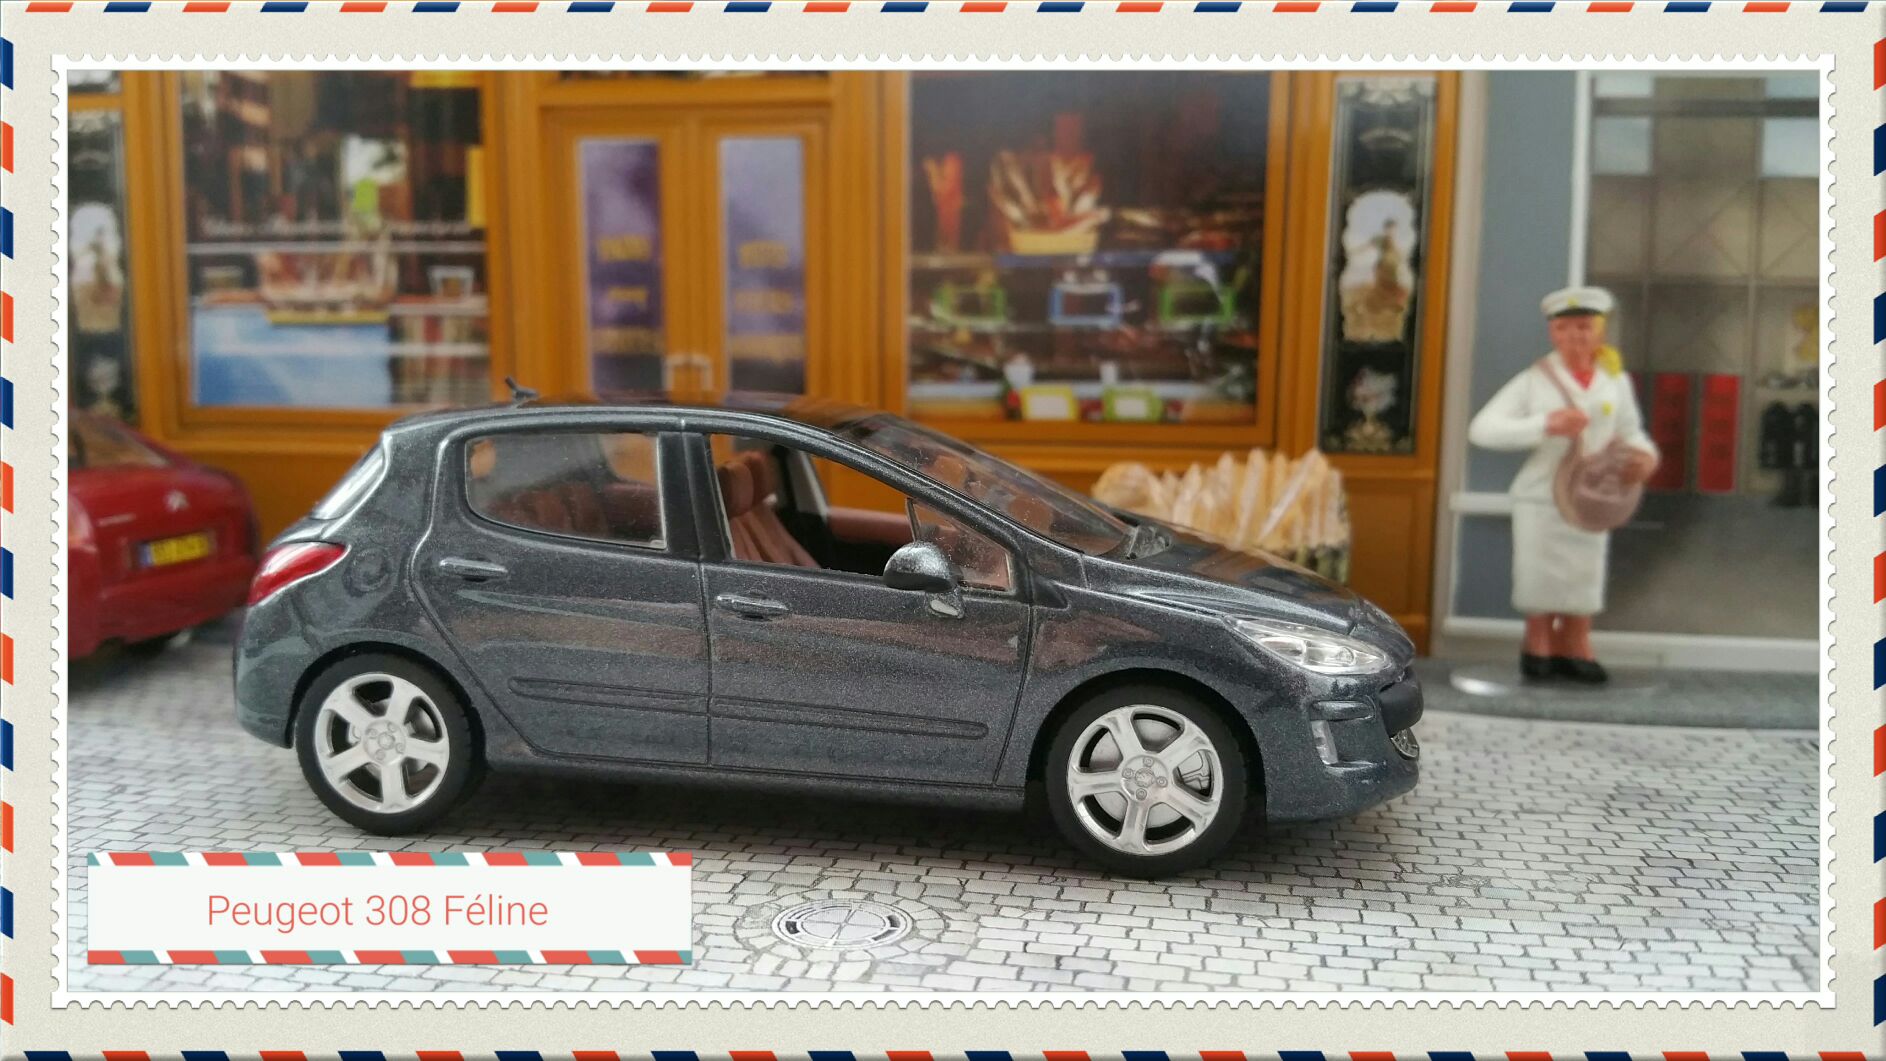 Peugeot 308 - Hors collection toy car collectible - Main Image 2